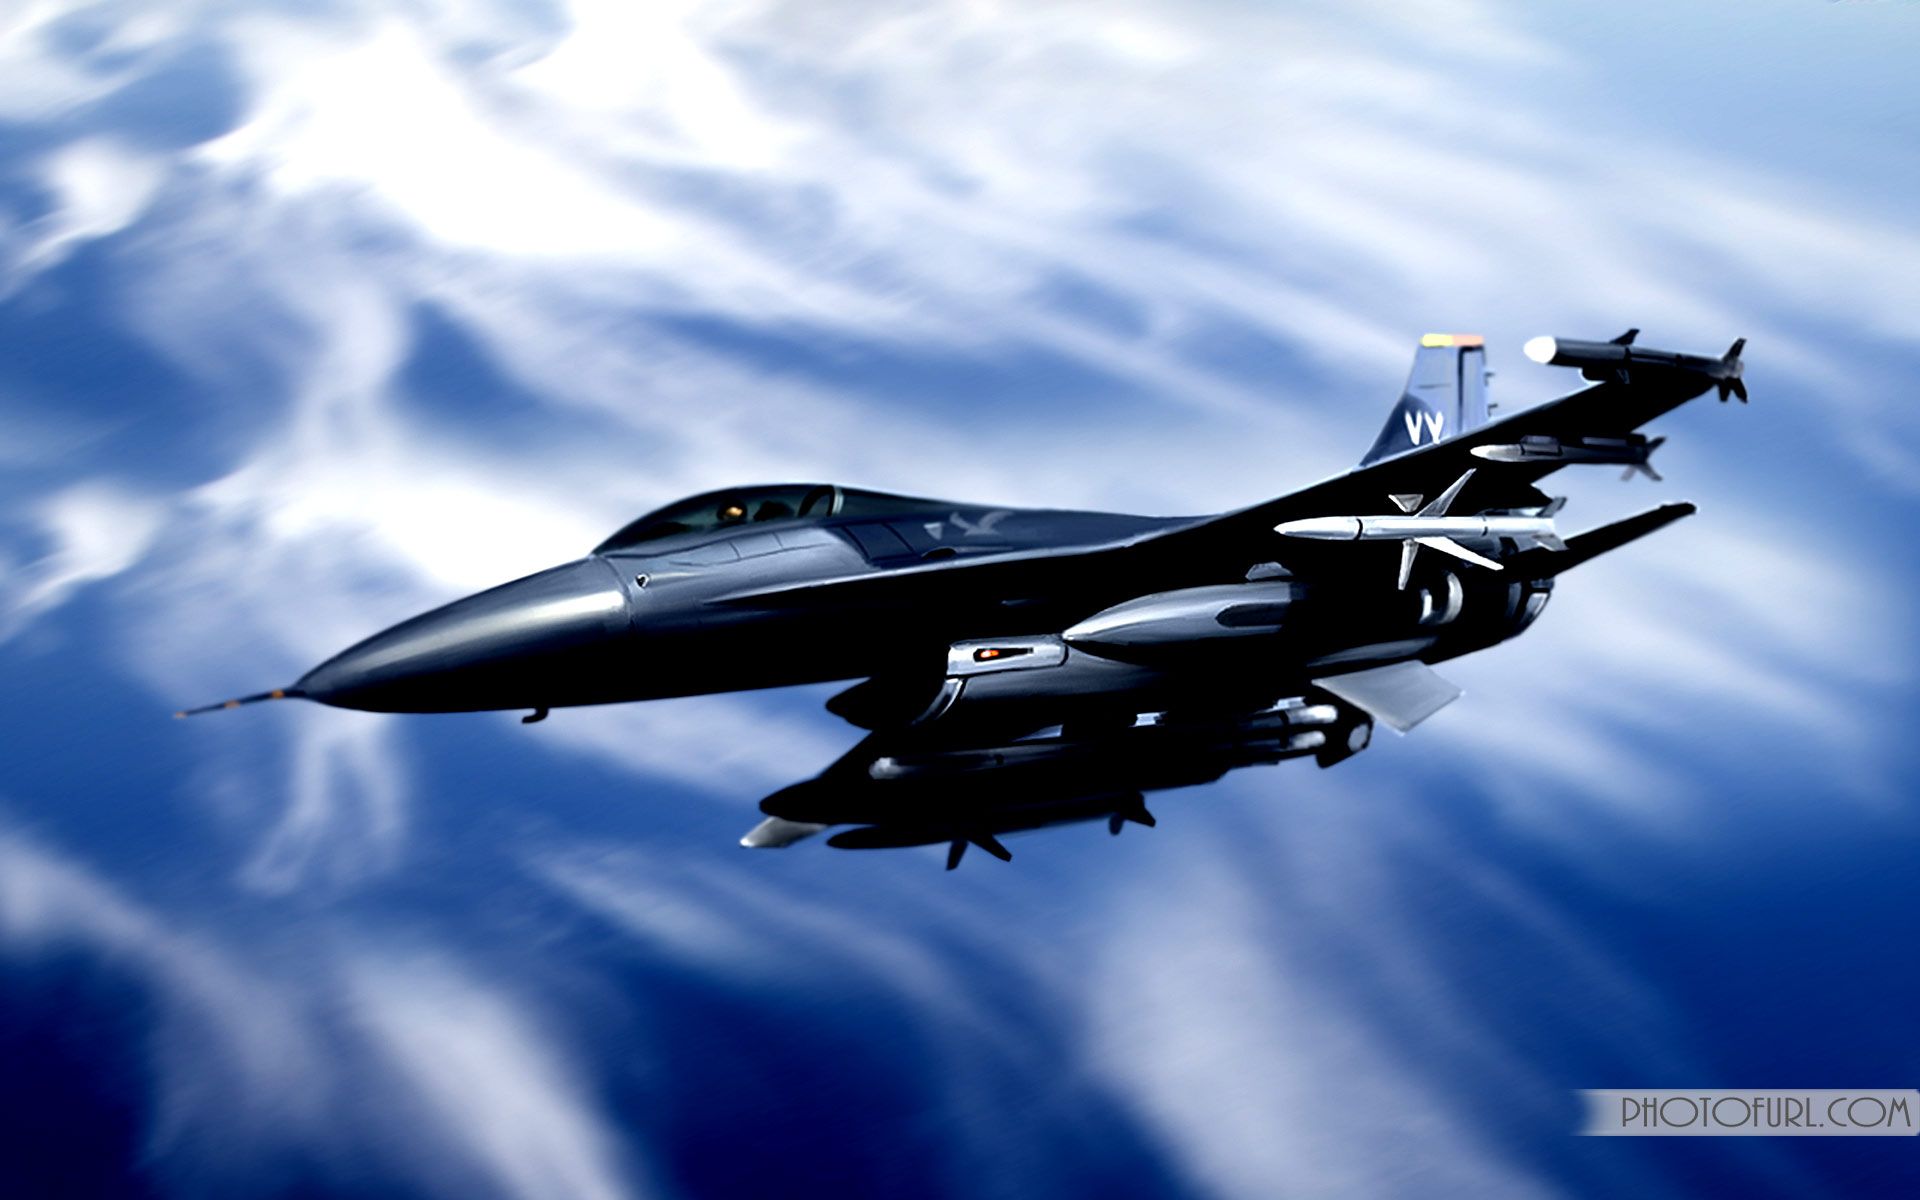 Fighter Jet Images | Free Photos, PNG Stickers, Wallpapers & Backgrounds -  rawpixel